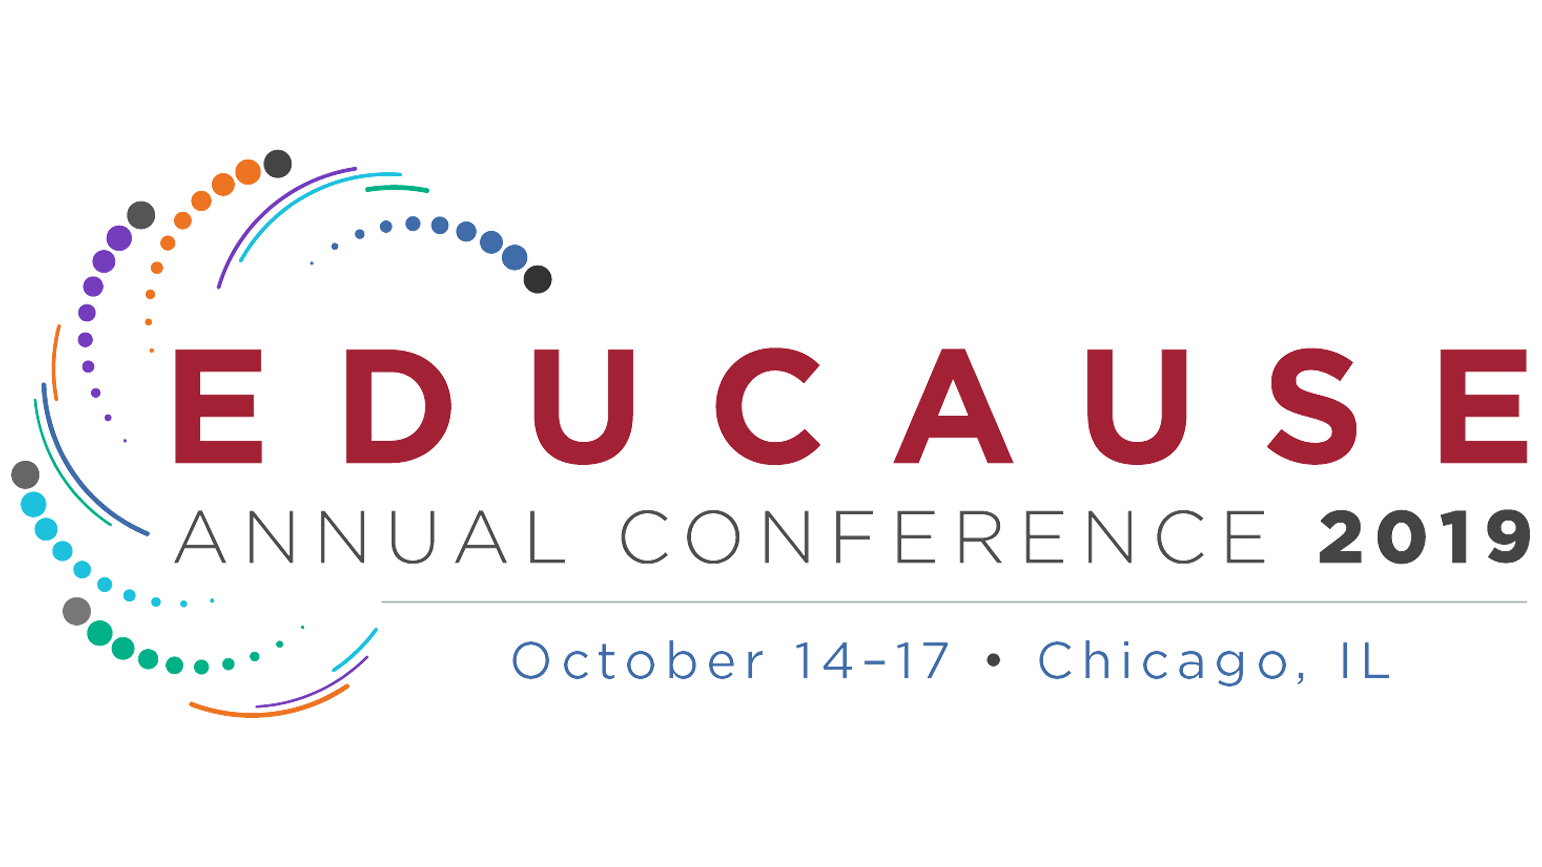 Graphic with the works "EDUCAUSE ANNUAL CONFERENCE 2019 / October 14-17, Chicago, IL"